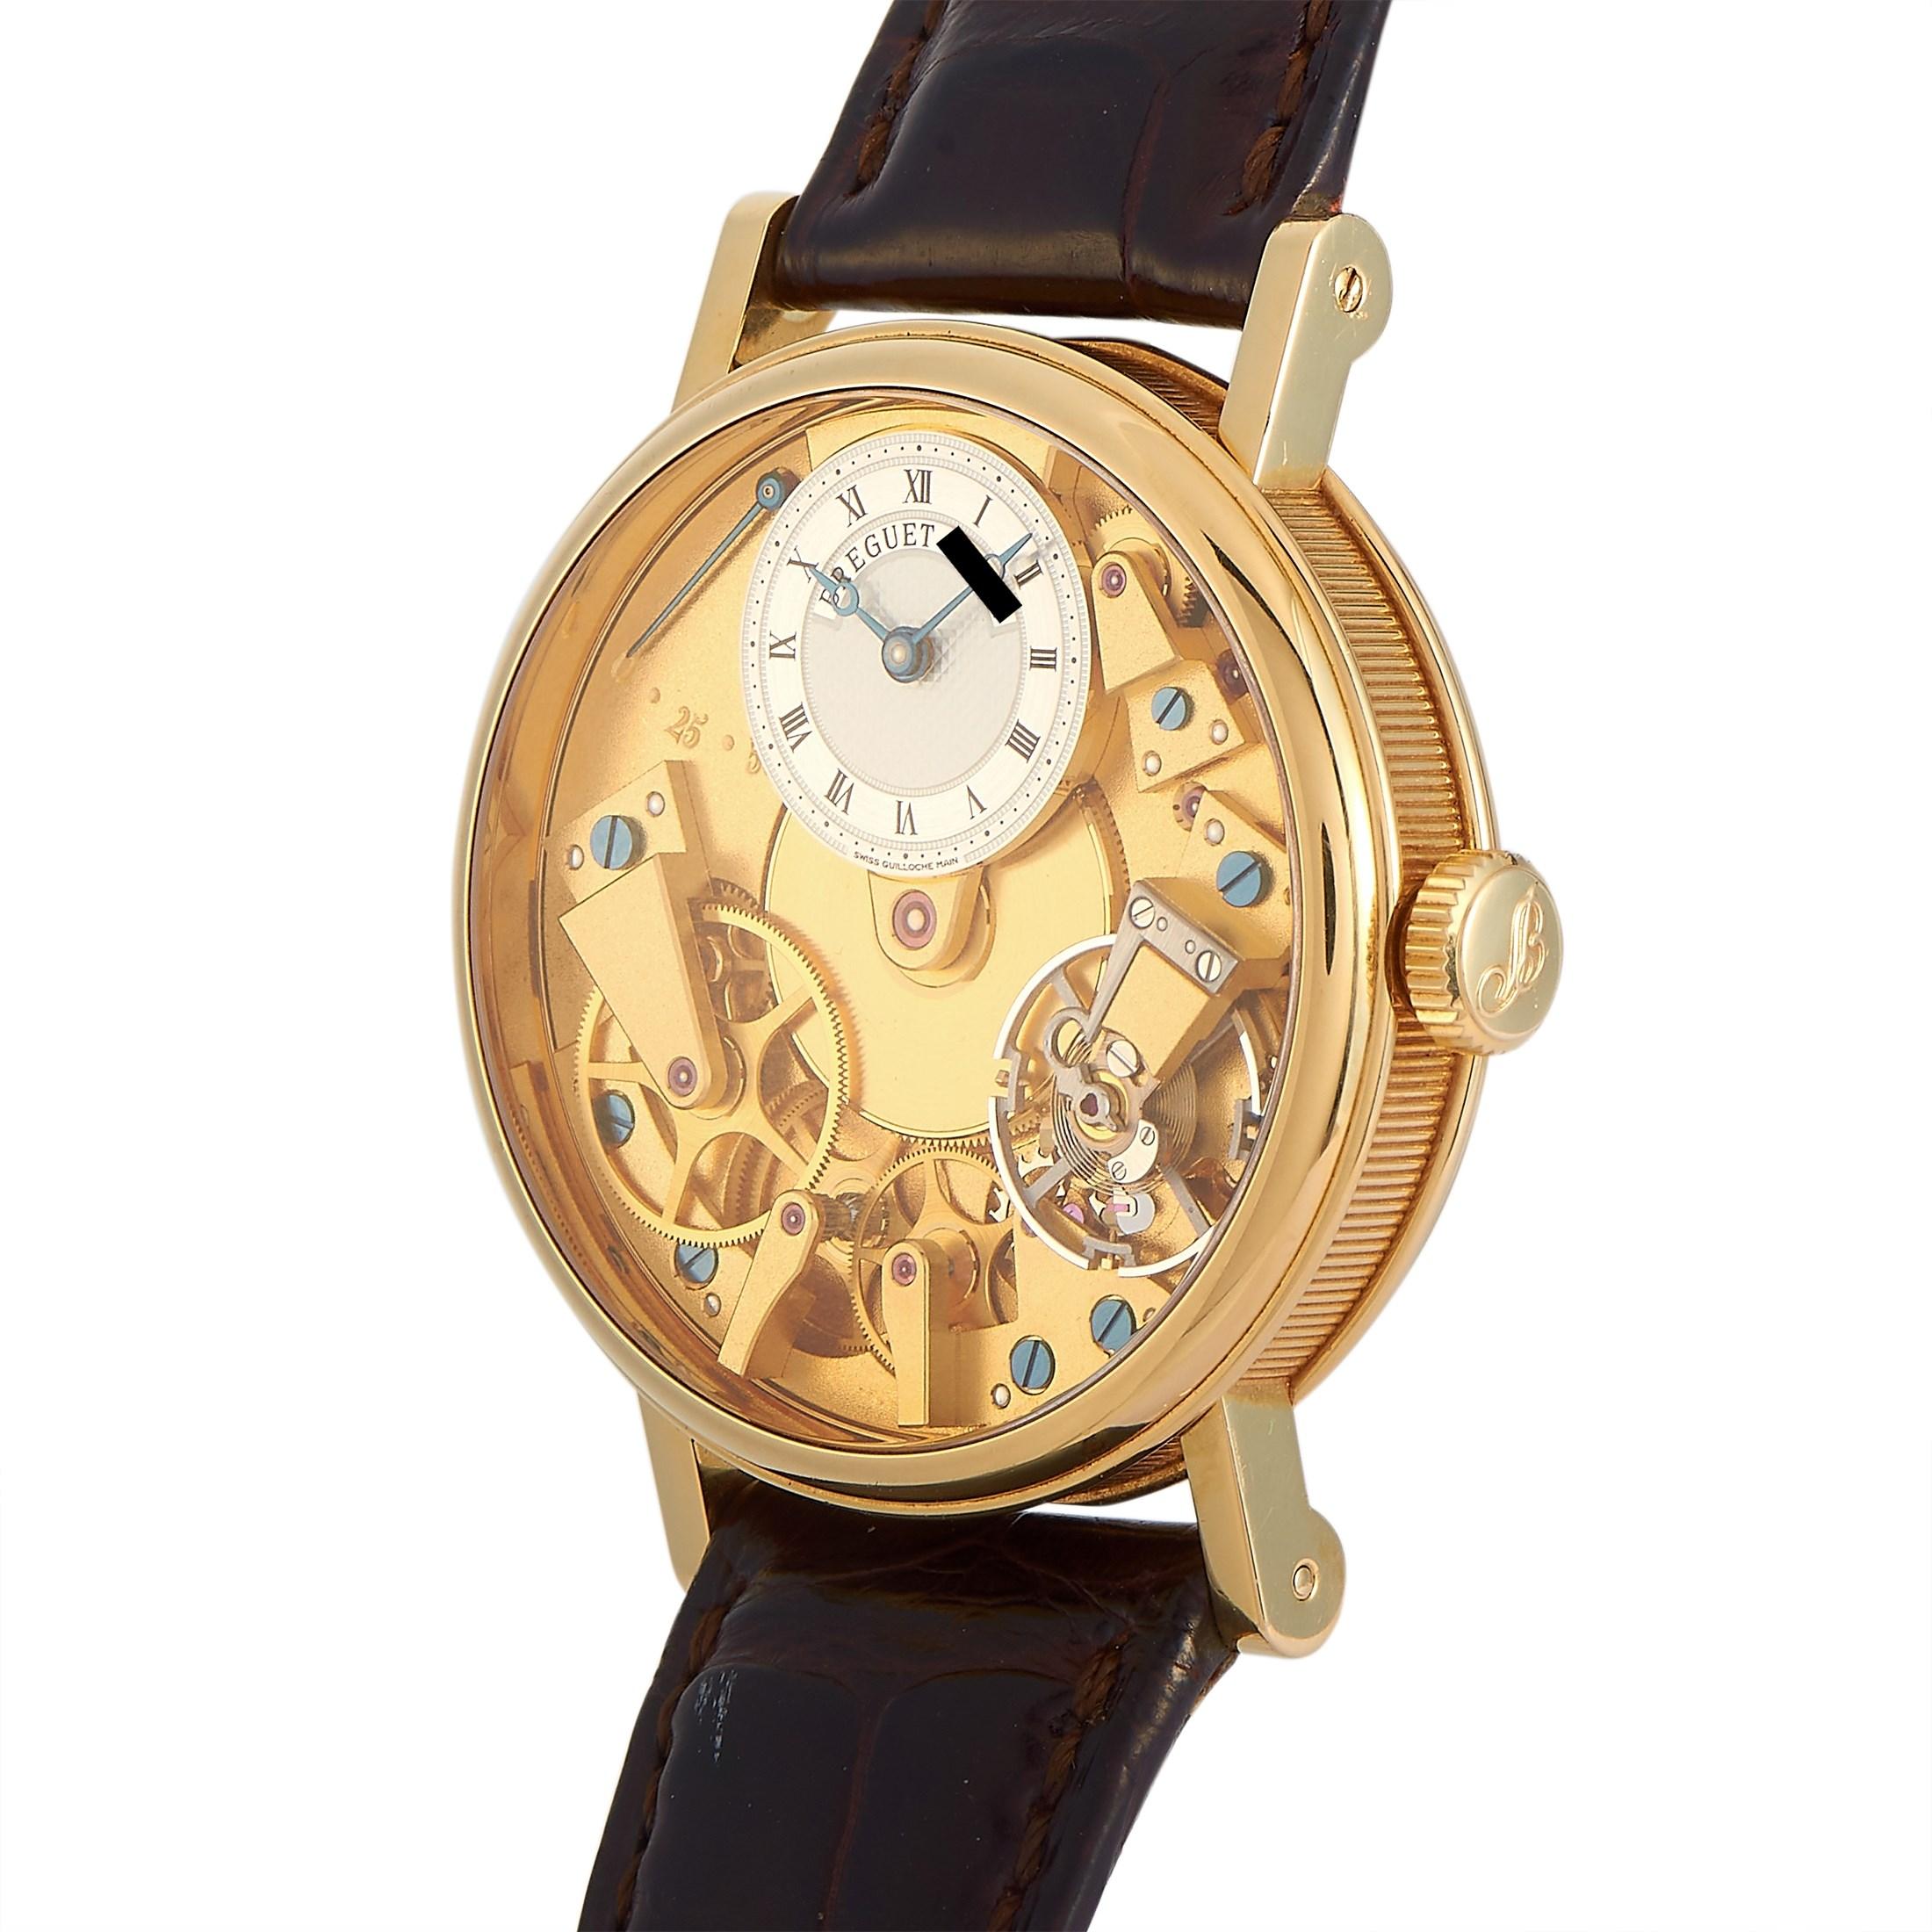 The Breguet Tradition Watch, reference number 7027, will captivate anyone who appreciates technical details and exceptional craftsmanship. 

This watch features a sleek, sophisticated 37mm round case made from 18K Yellow Gold. Opulent gold detailing